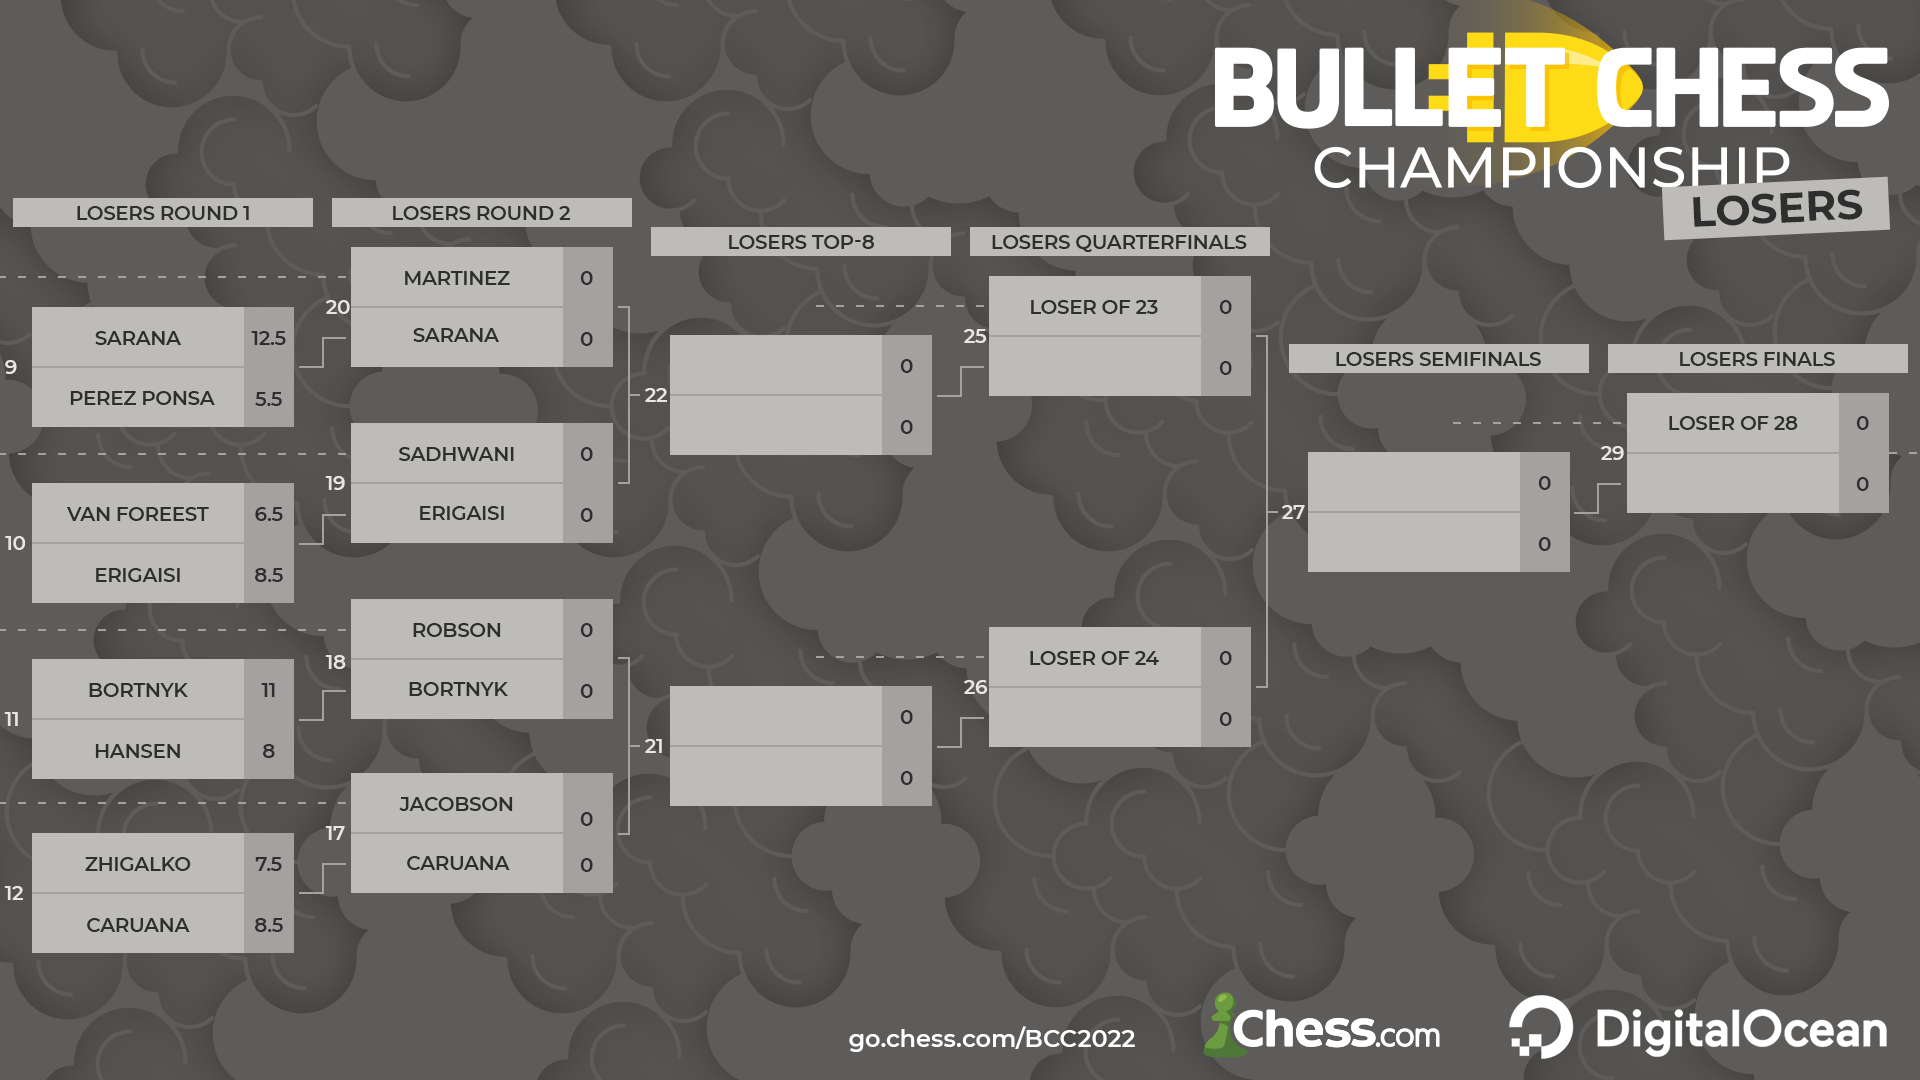 Bullet Chess Championship 2022 Losers Bracket